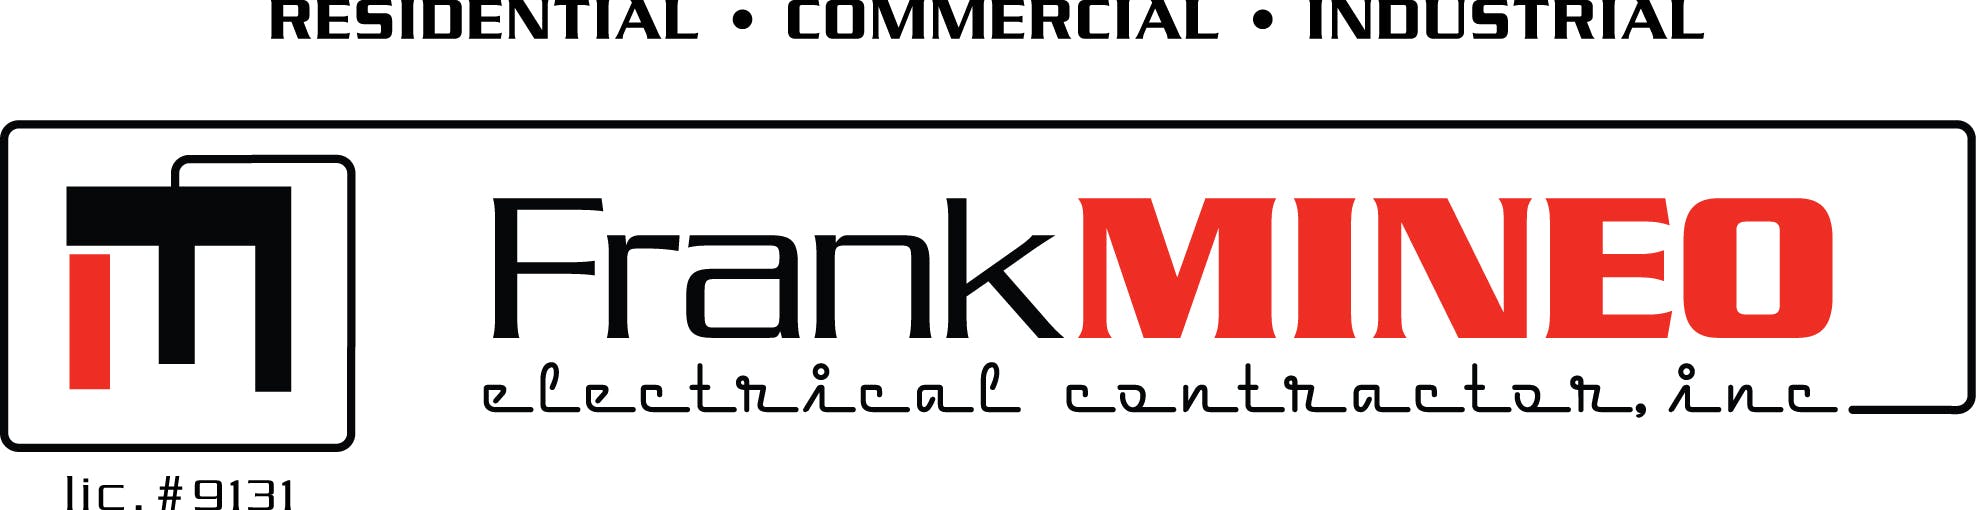 Frank Mineo Electrical Contractor, Inc.